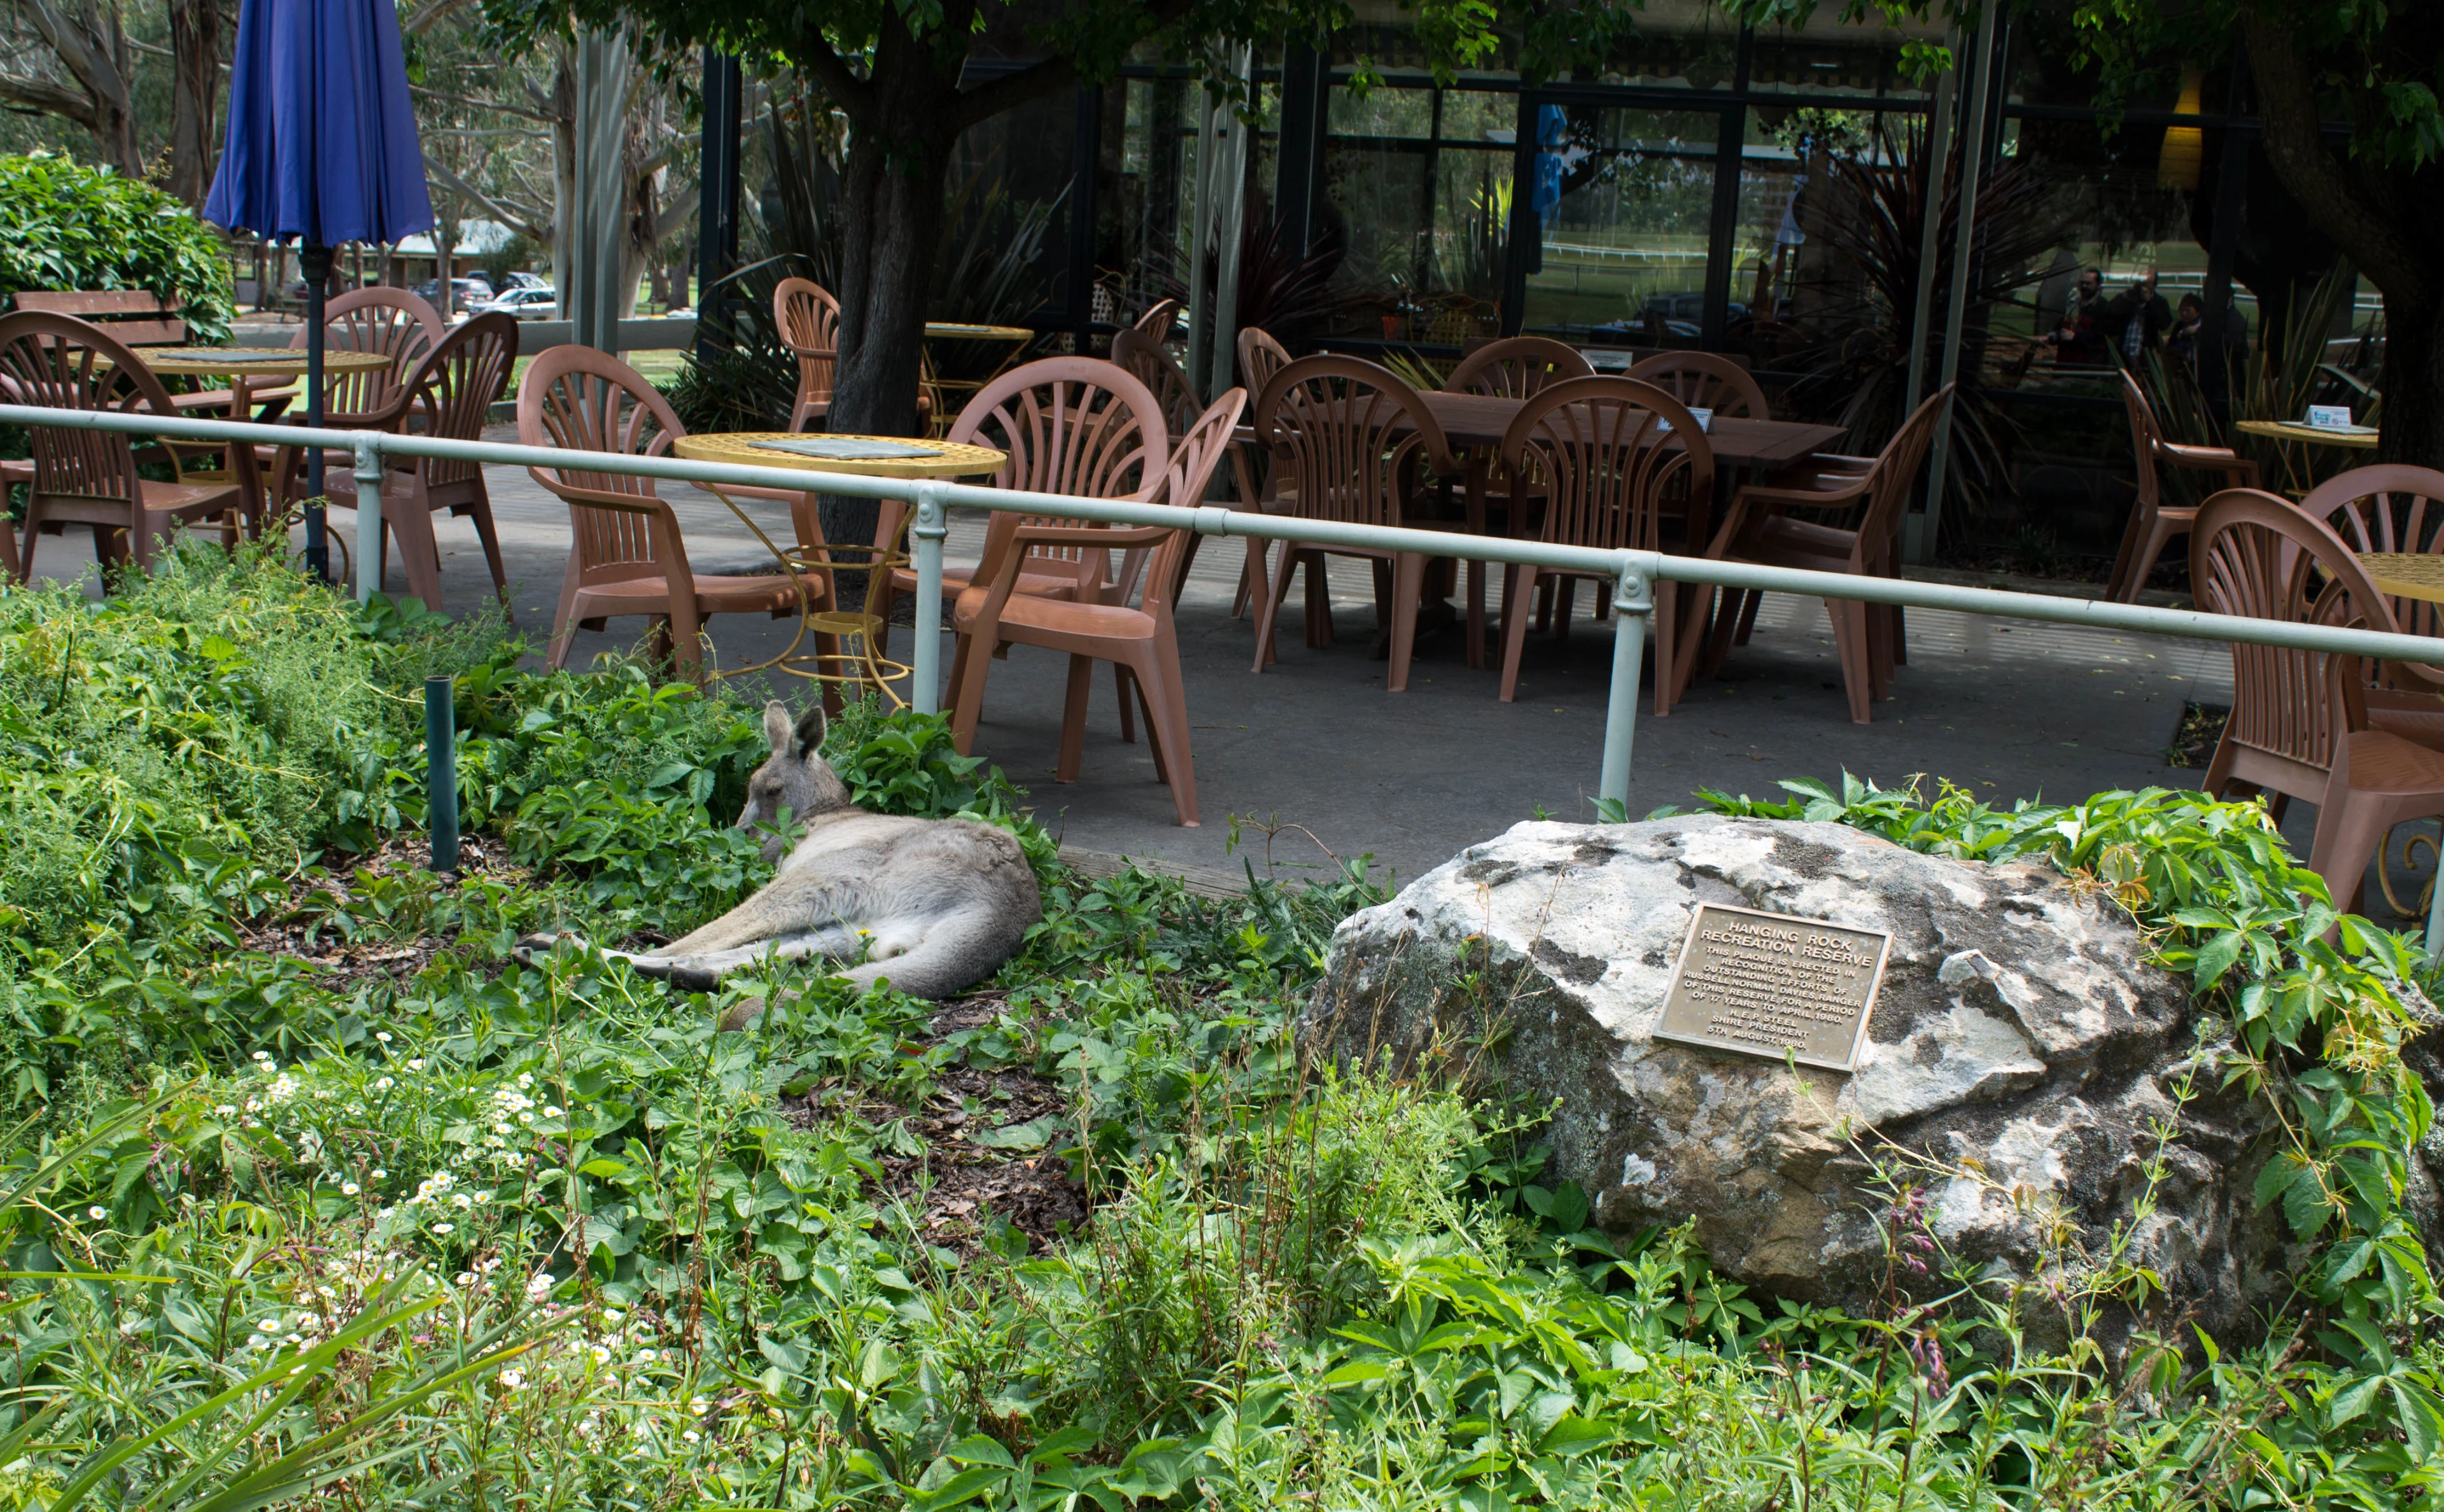 Kangaroo laying on grass next to chairs and tables at cafe